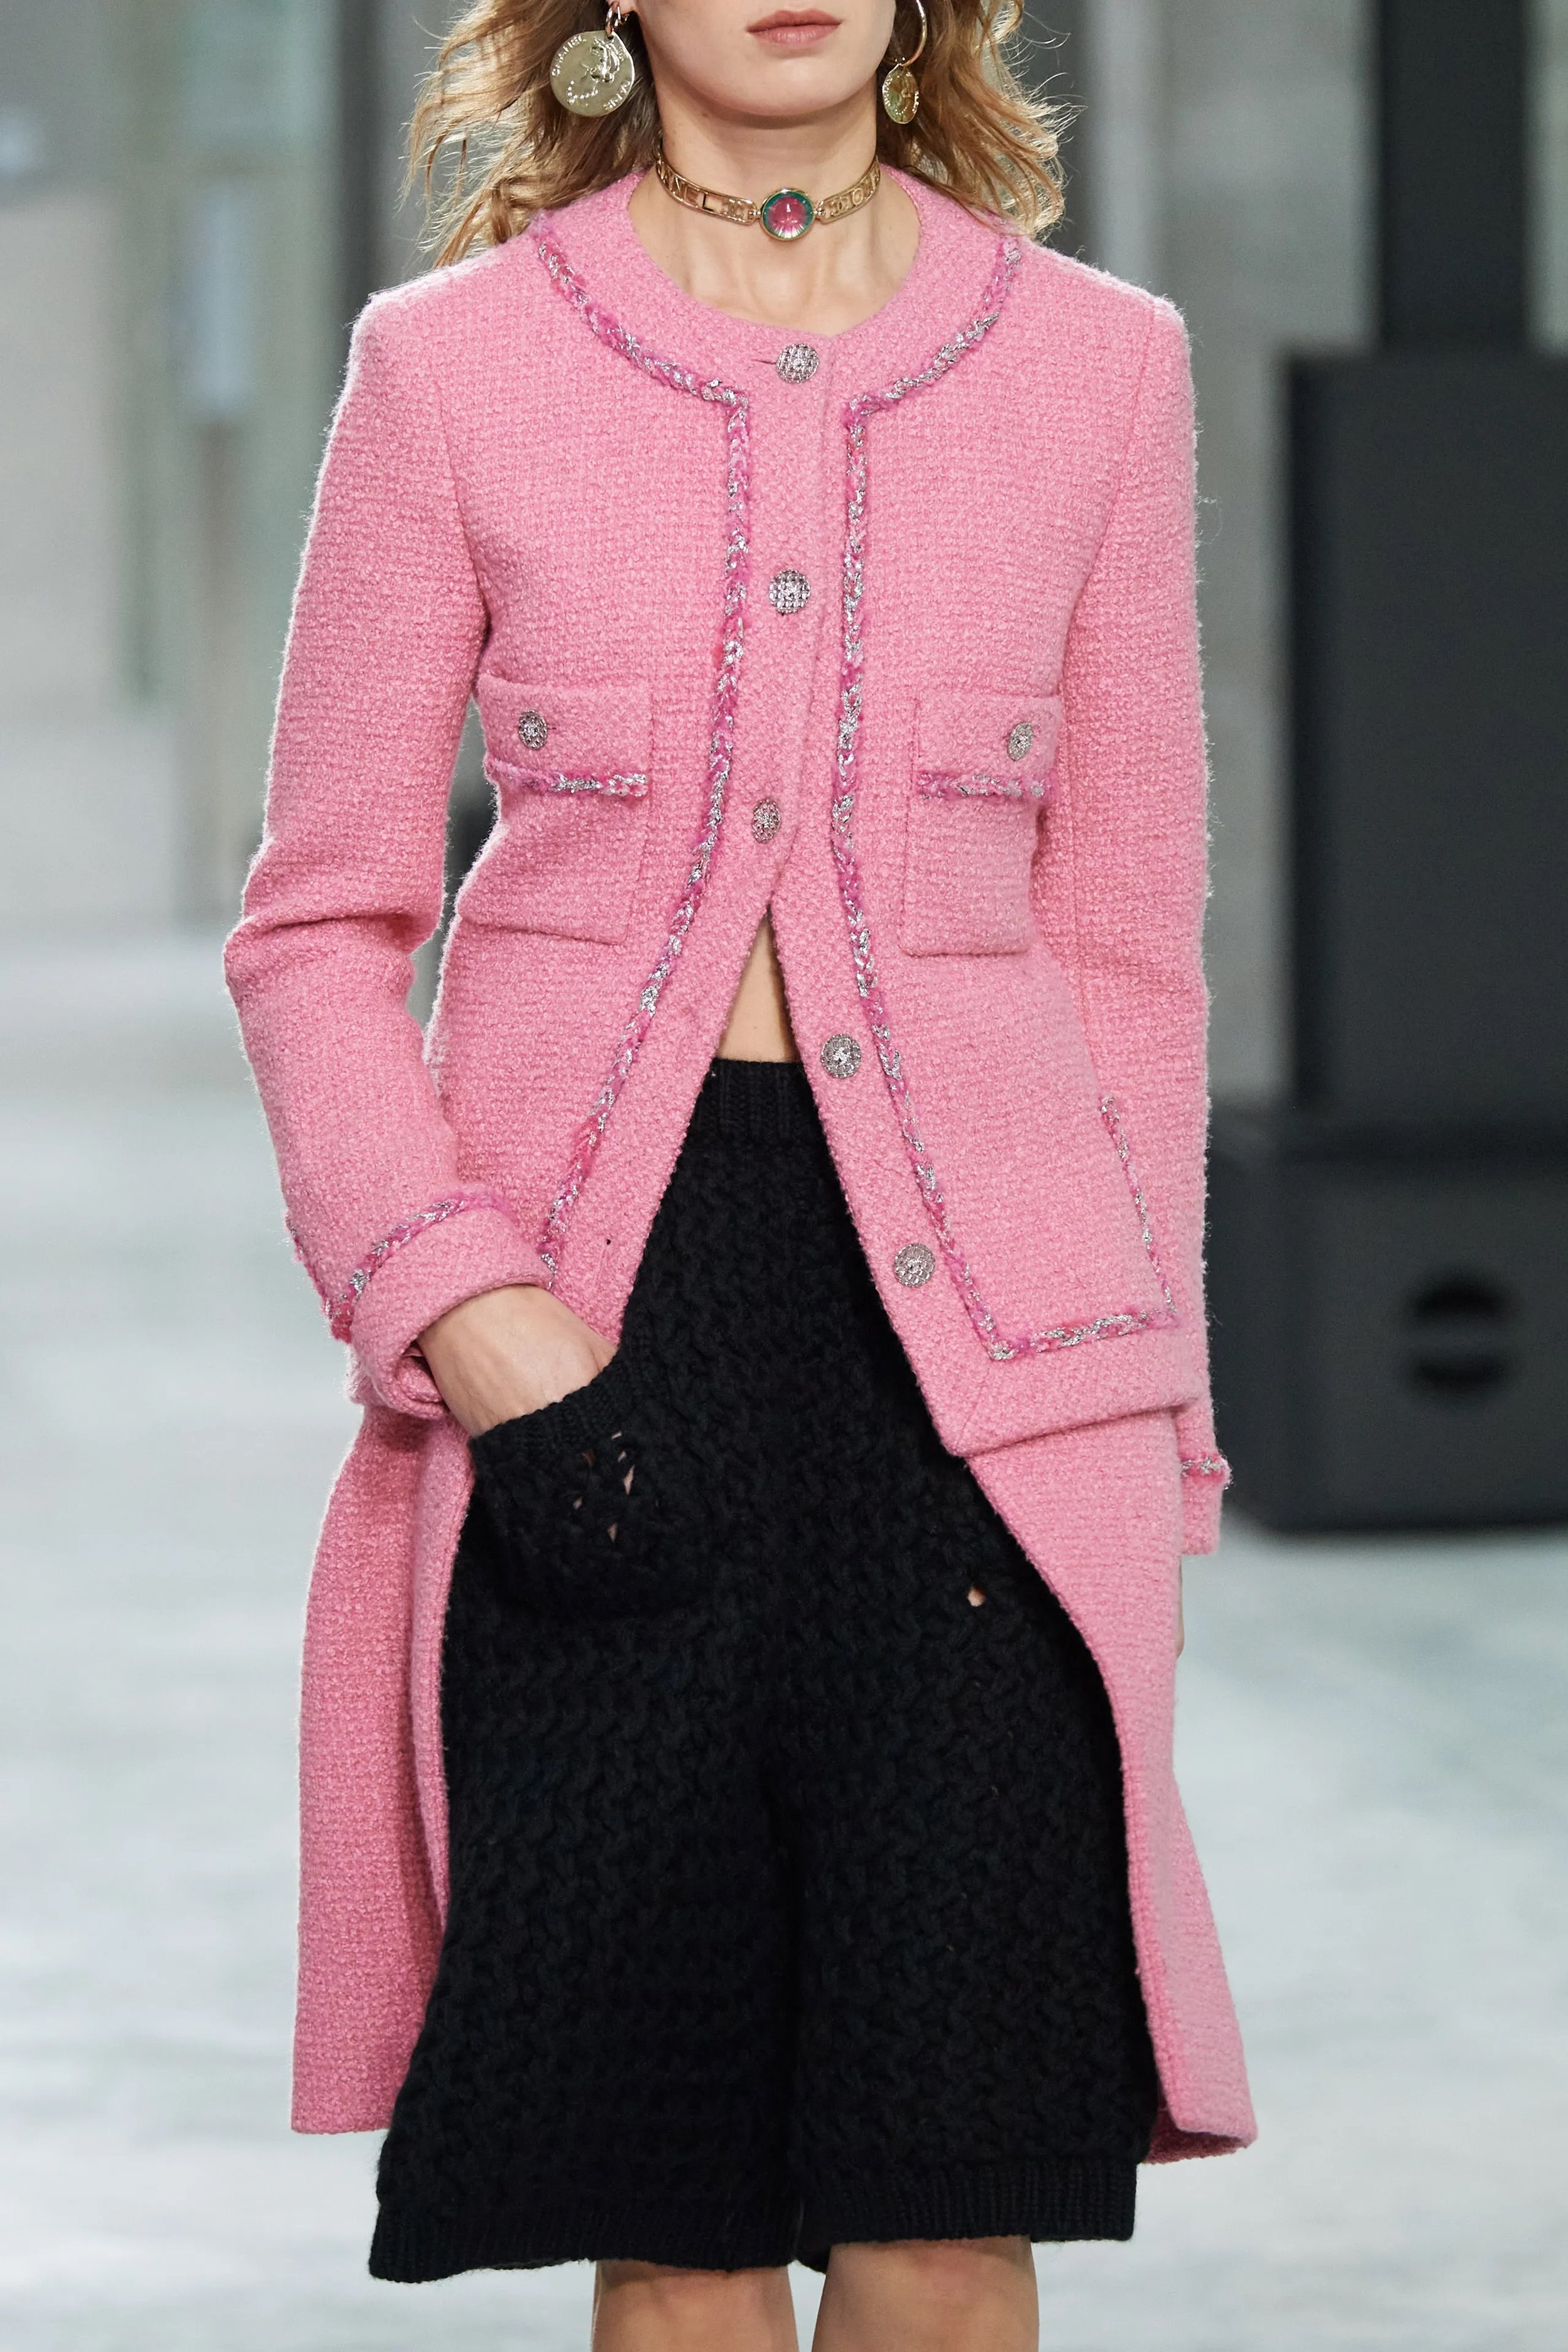 Chanel Wool Coat with Patch Pockets.jpg